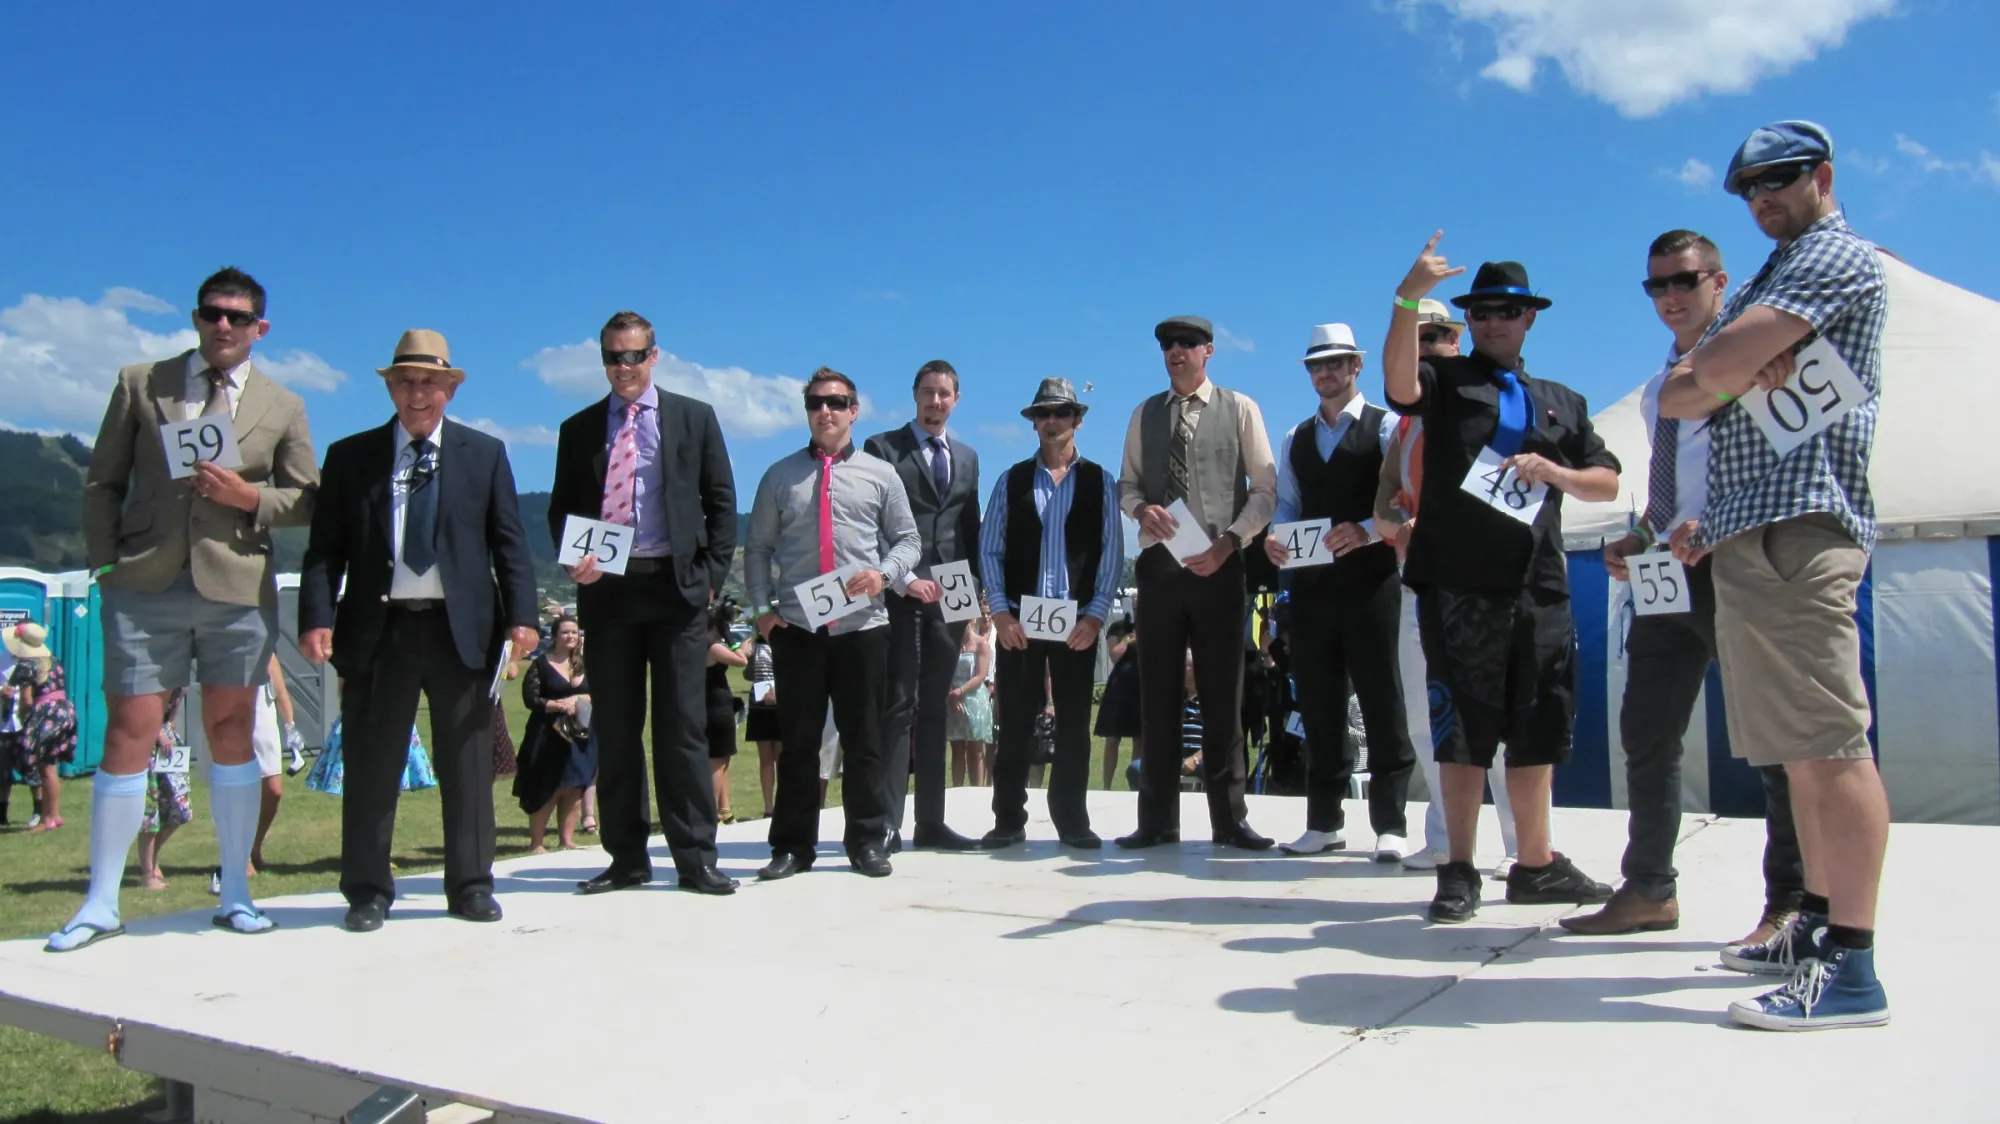 Best dressed male - Fashion in the field at Nelson harness races summer festival